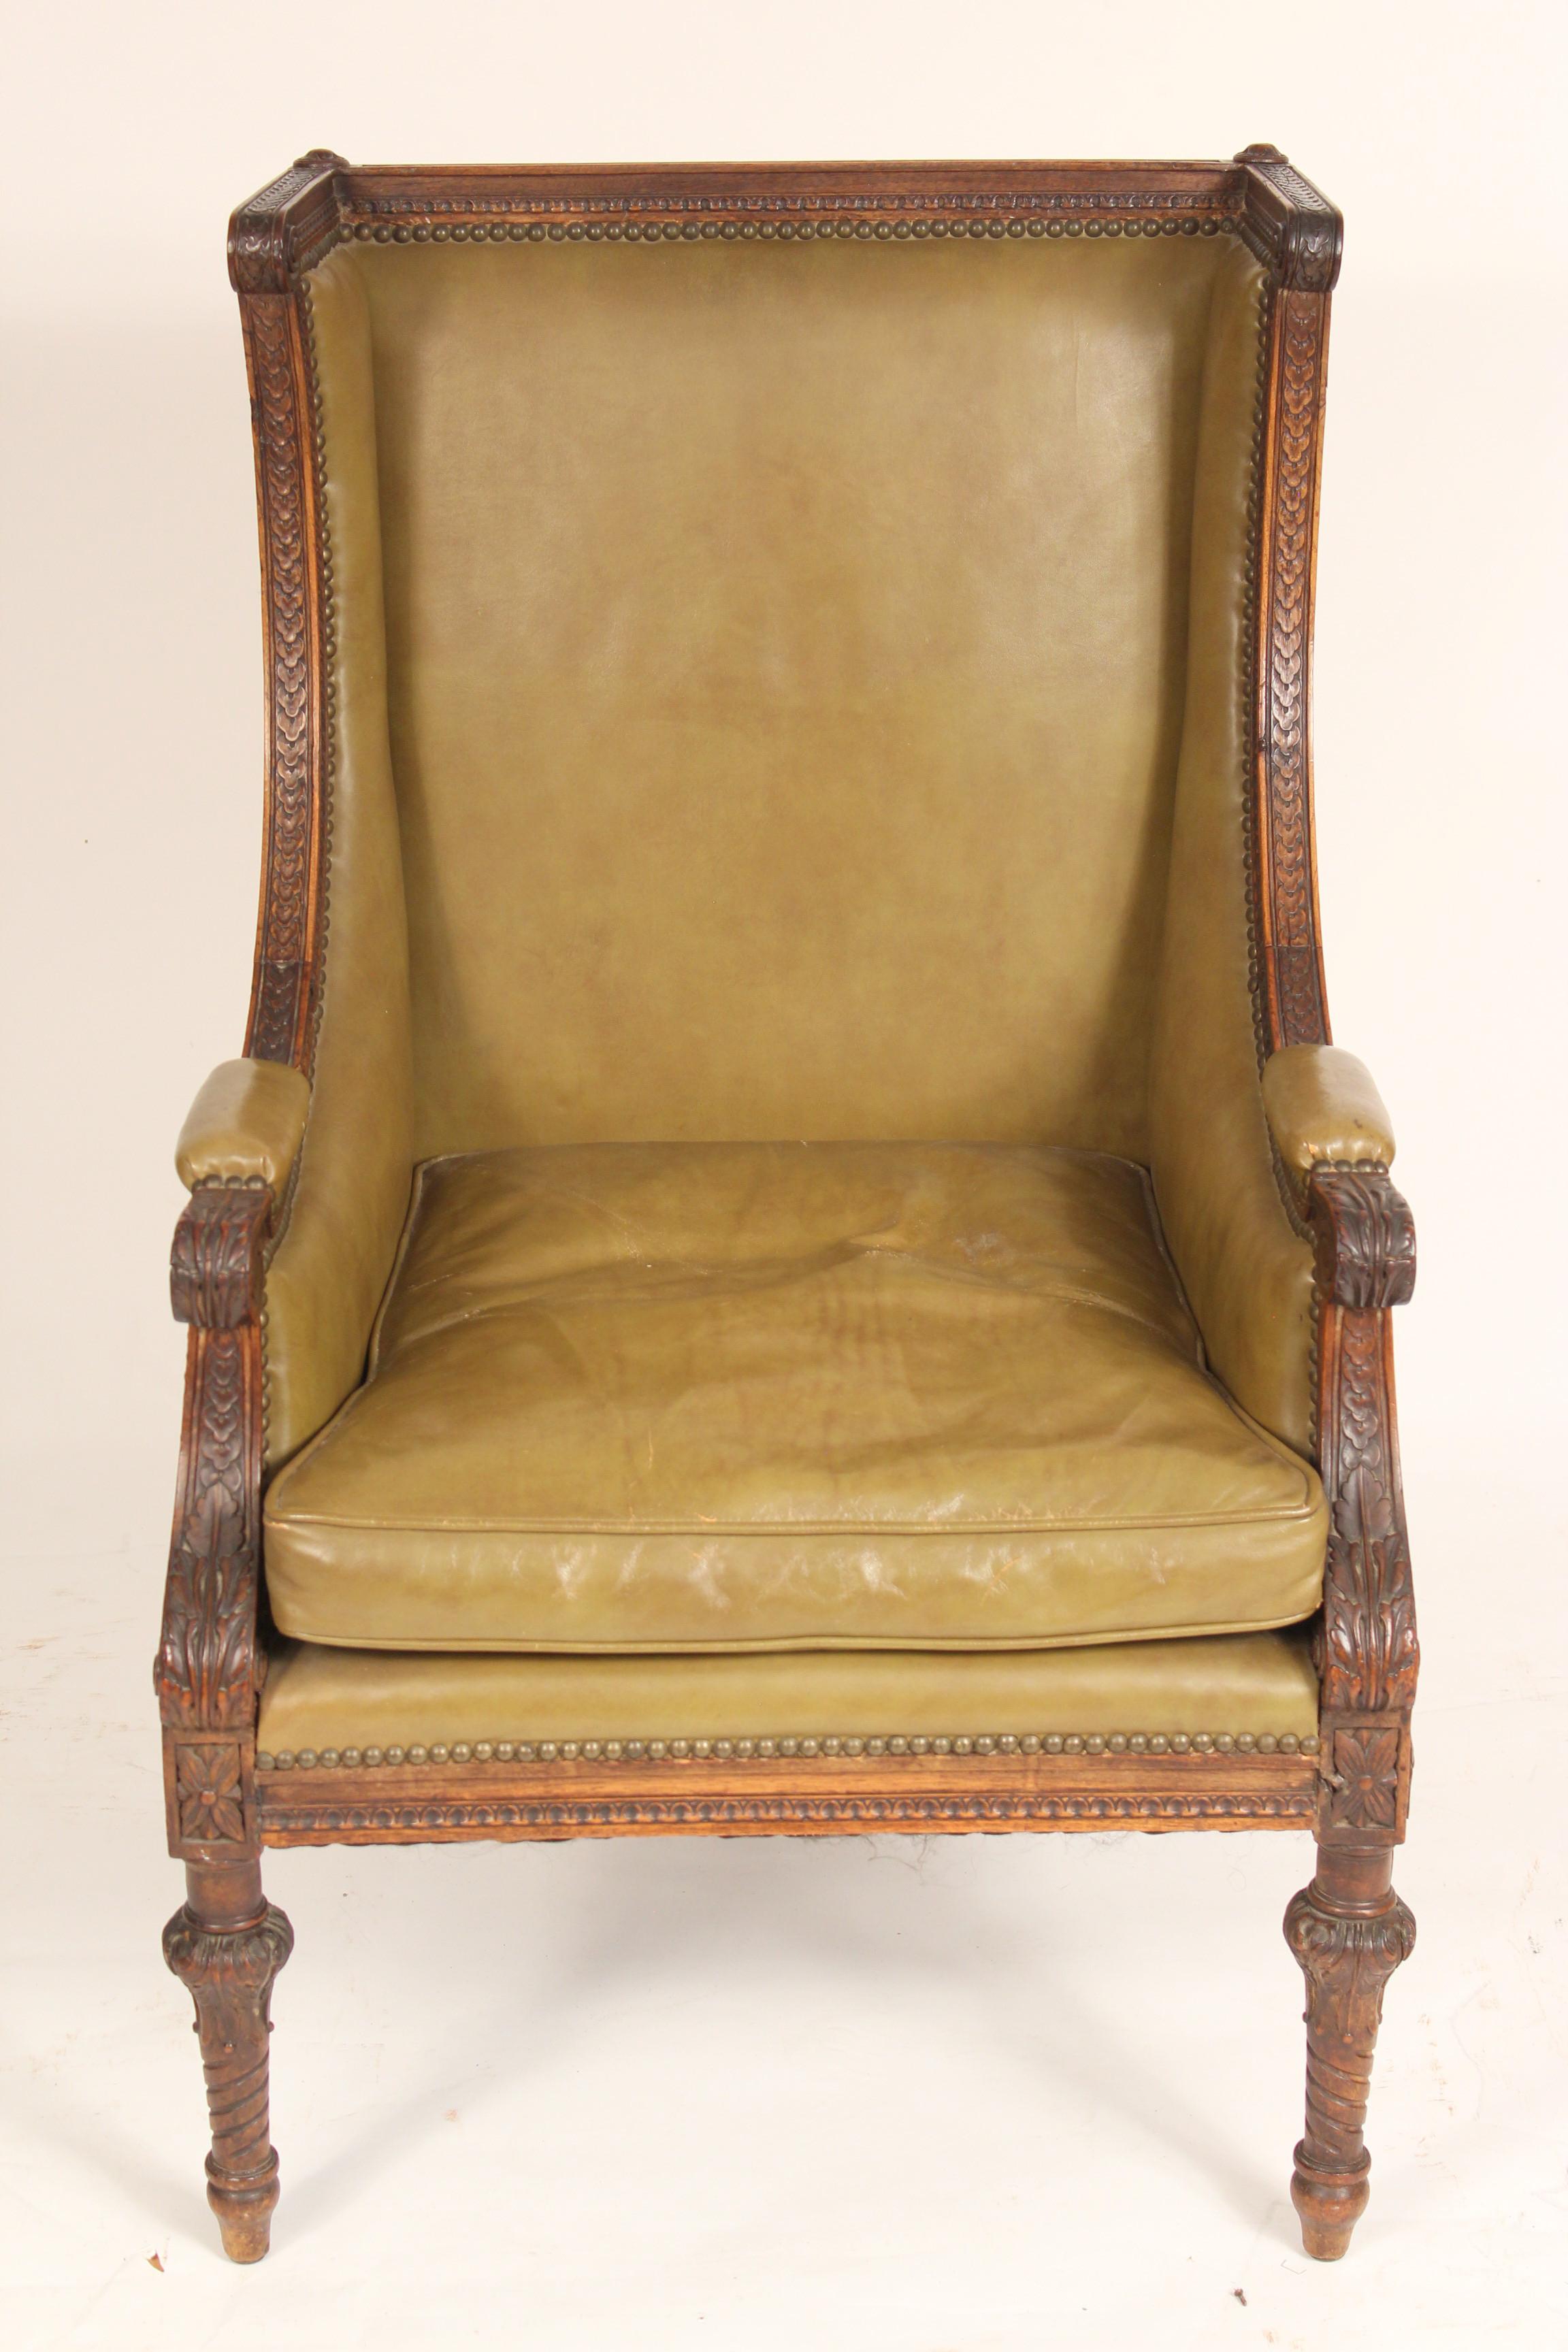 Antique Louis XVI style carved walnut bergere with leather upholstery, circa 1900. Nice quality hand carved walnut frame with leather upholstery.